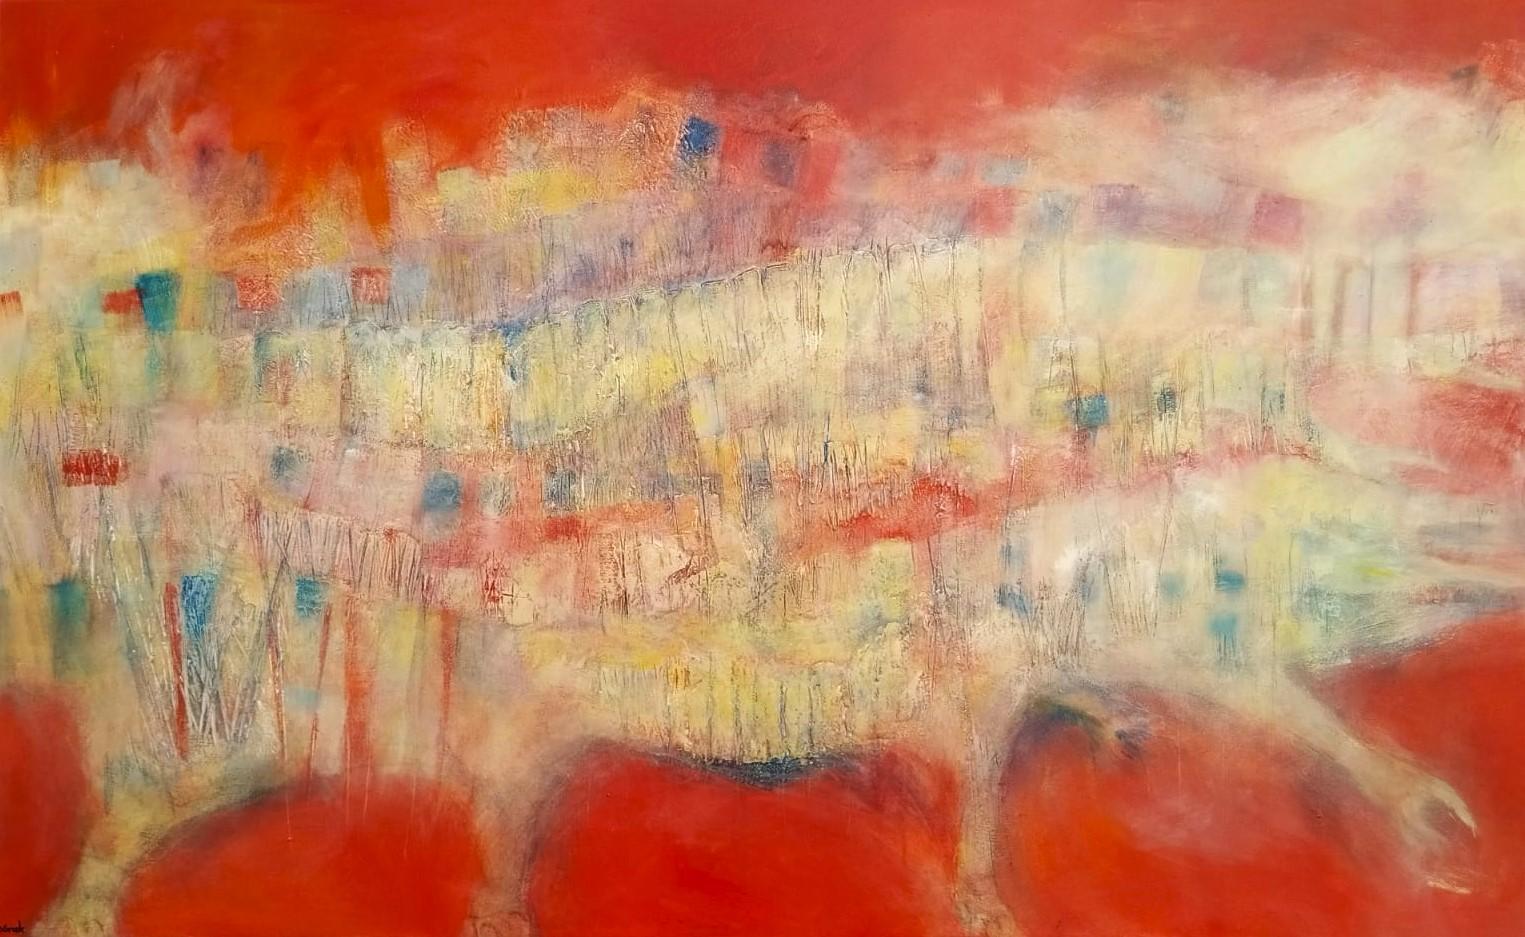 Marlena Hórak Abstract Painting - Large Red Abstract Textured Oil Painting "Origins"